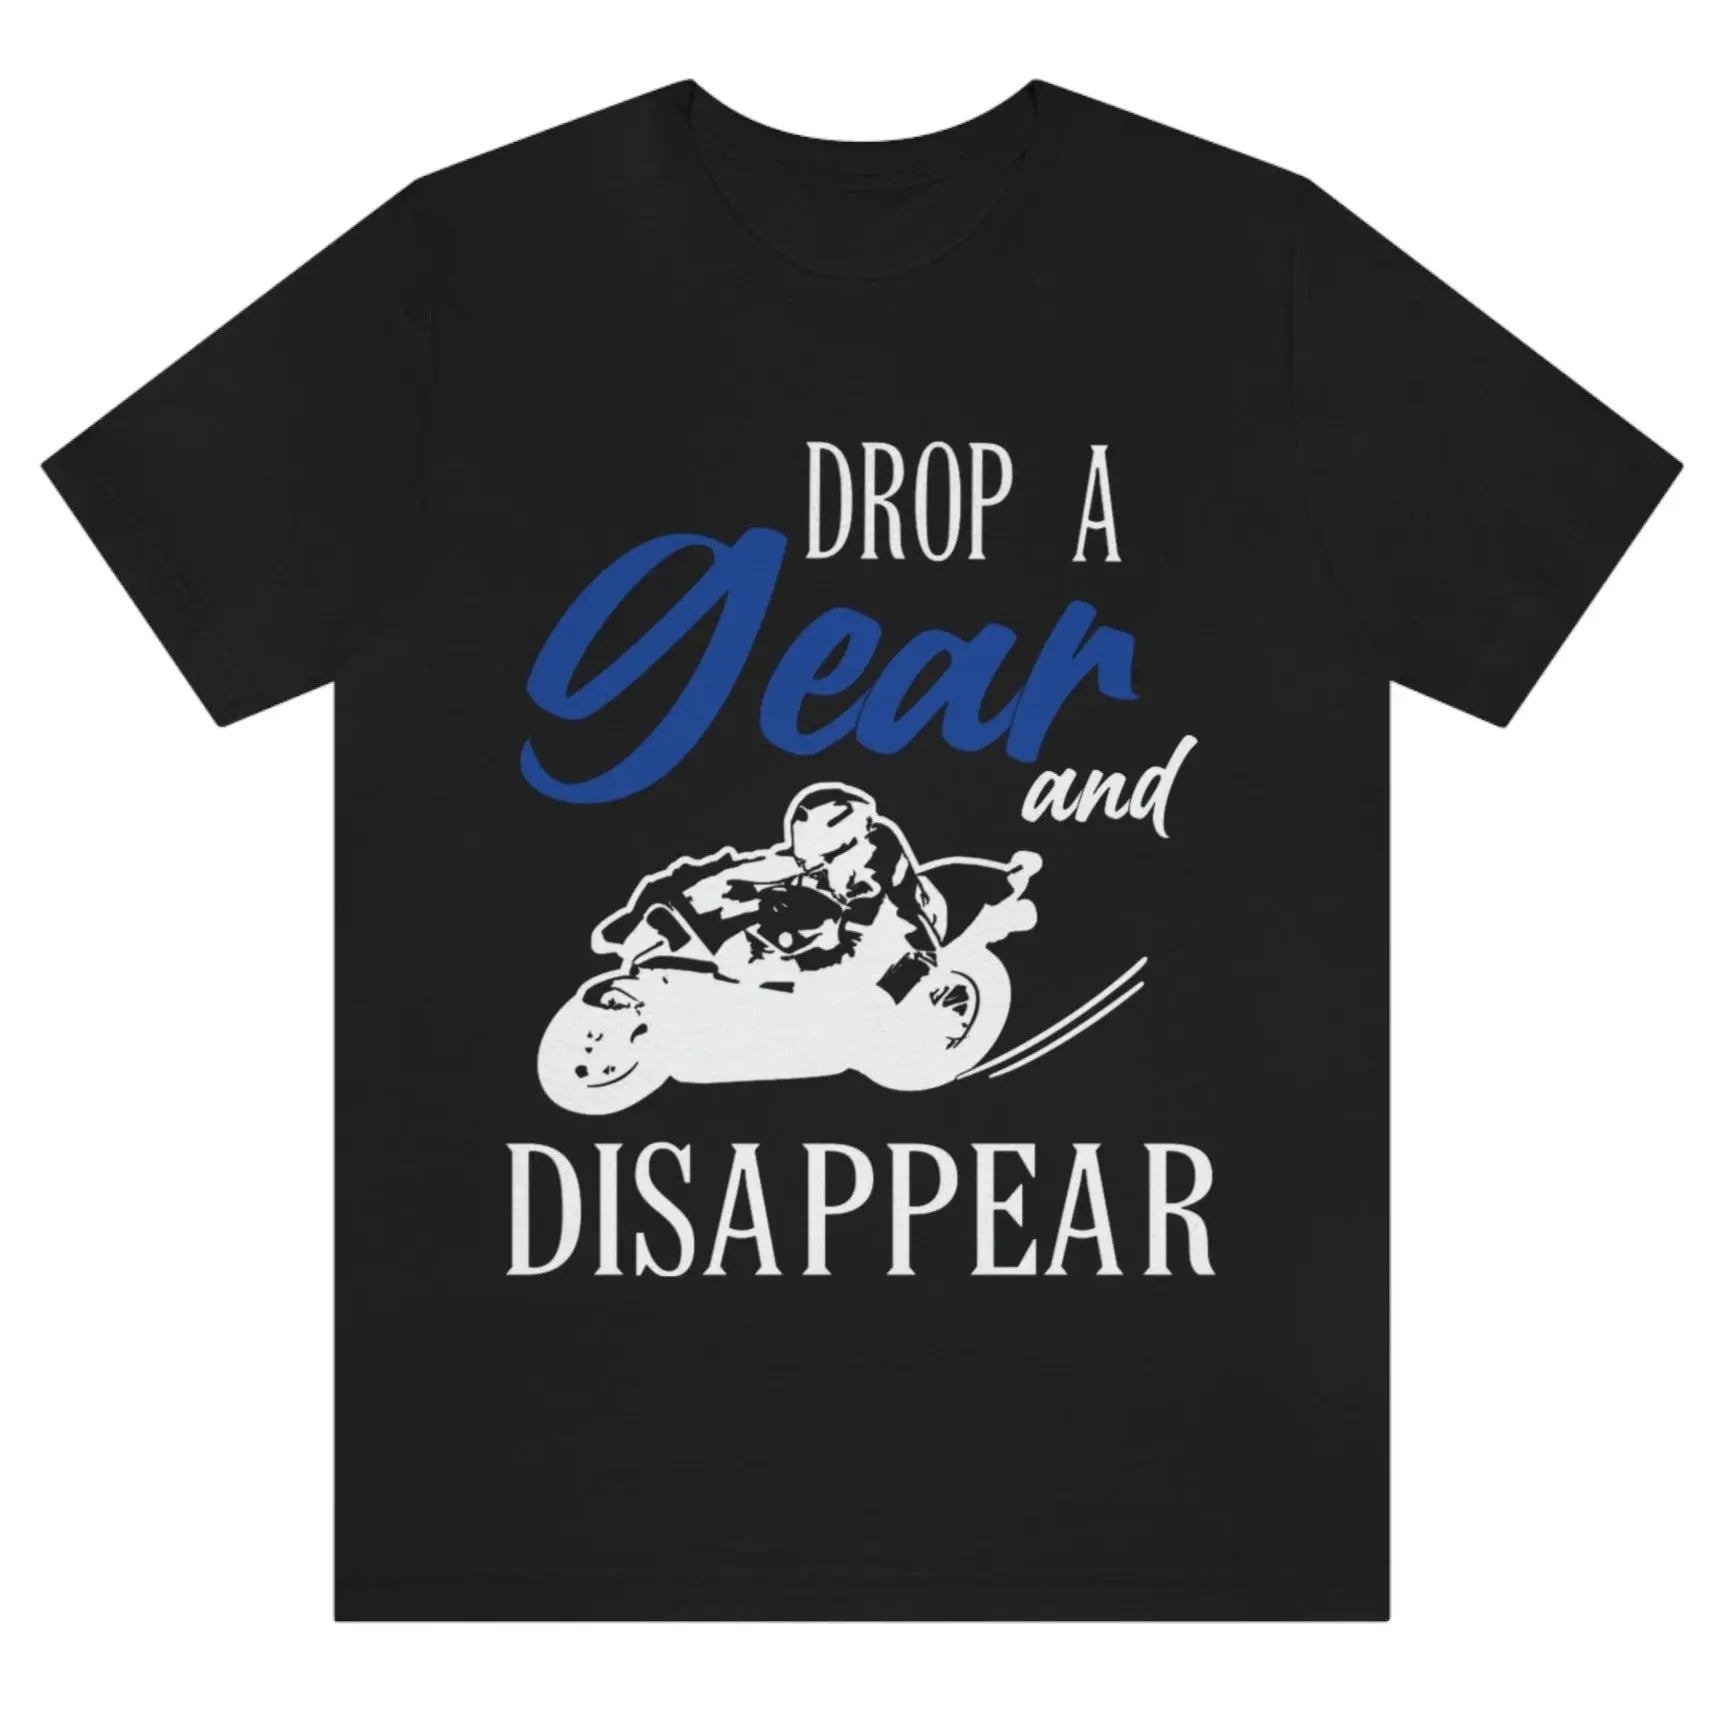 drop-a-gear-and-disappear-black-t-shirt